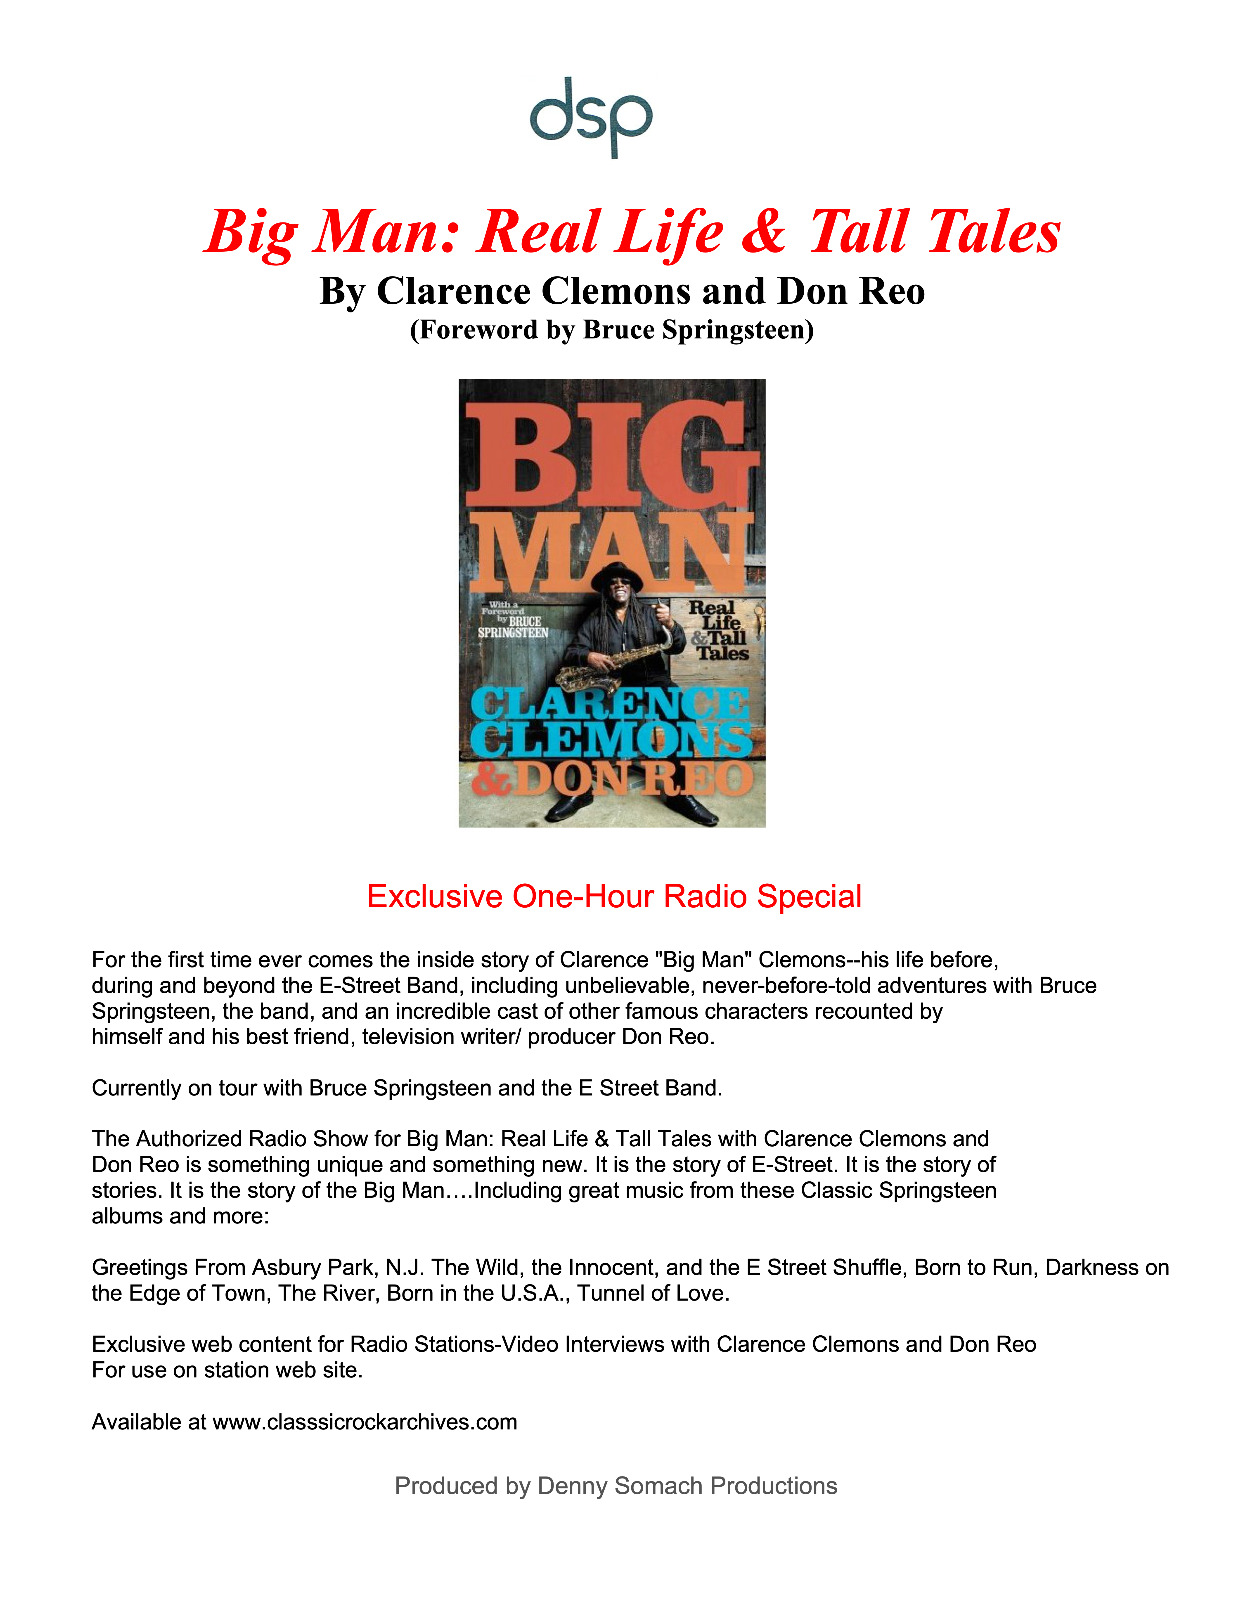 Clarence Clemons (E Street Band) Big Man Radio Show - NEW with Cue & Ad